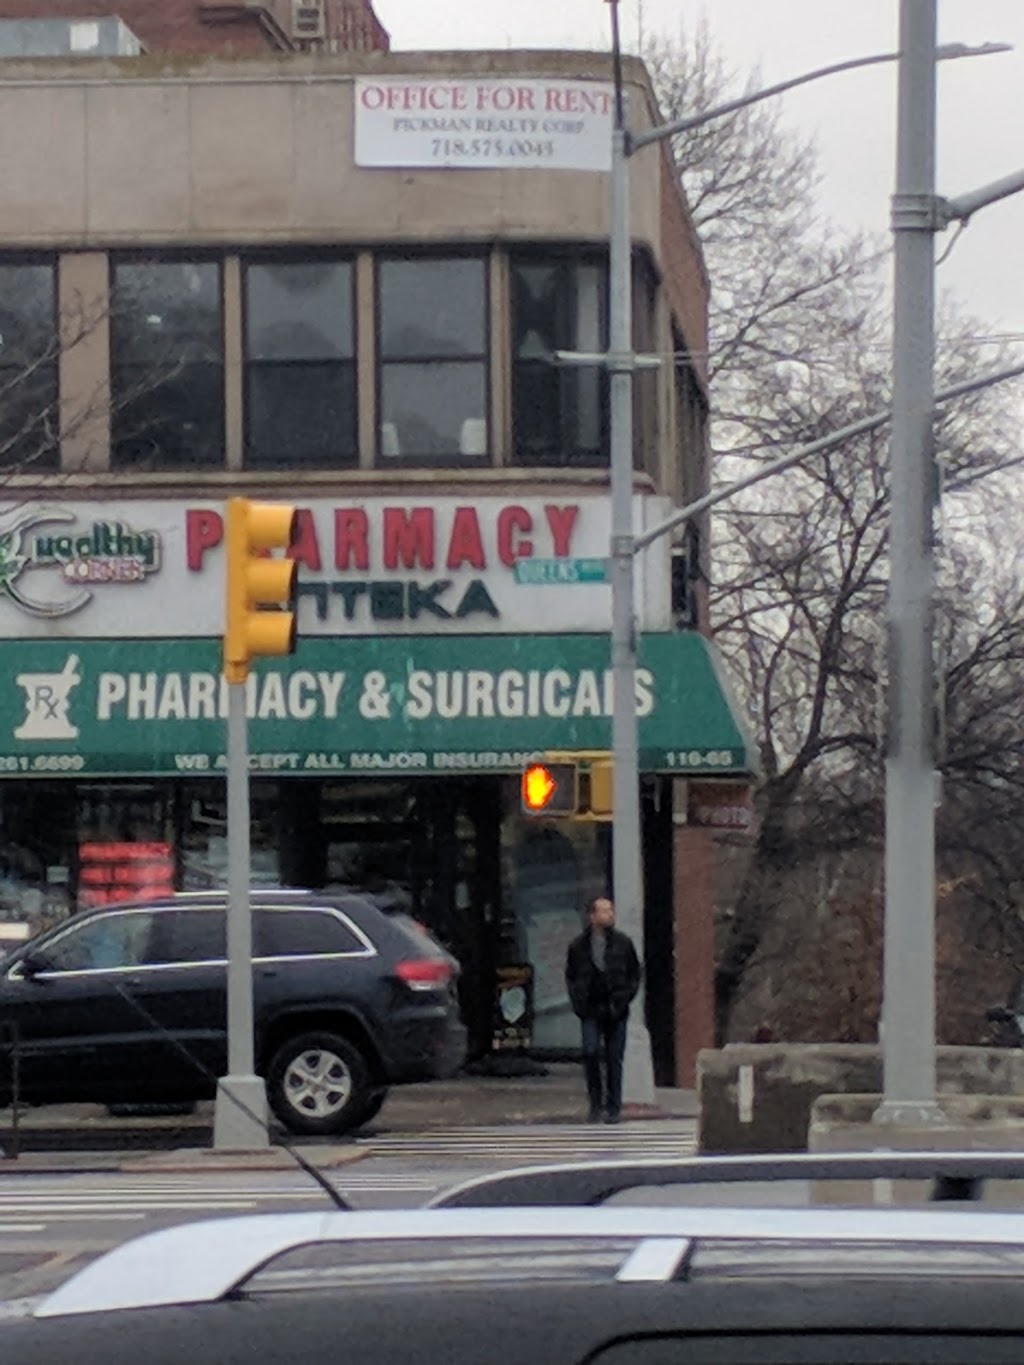 Healthy Corner Pharmacy | 11665 Queens Blvd, Queens, NY 11375, USA | Phone: (718) 261-6699